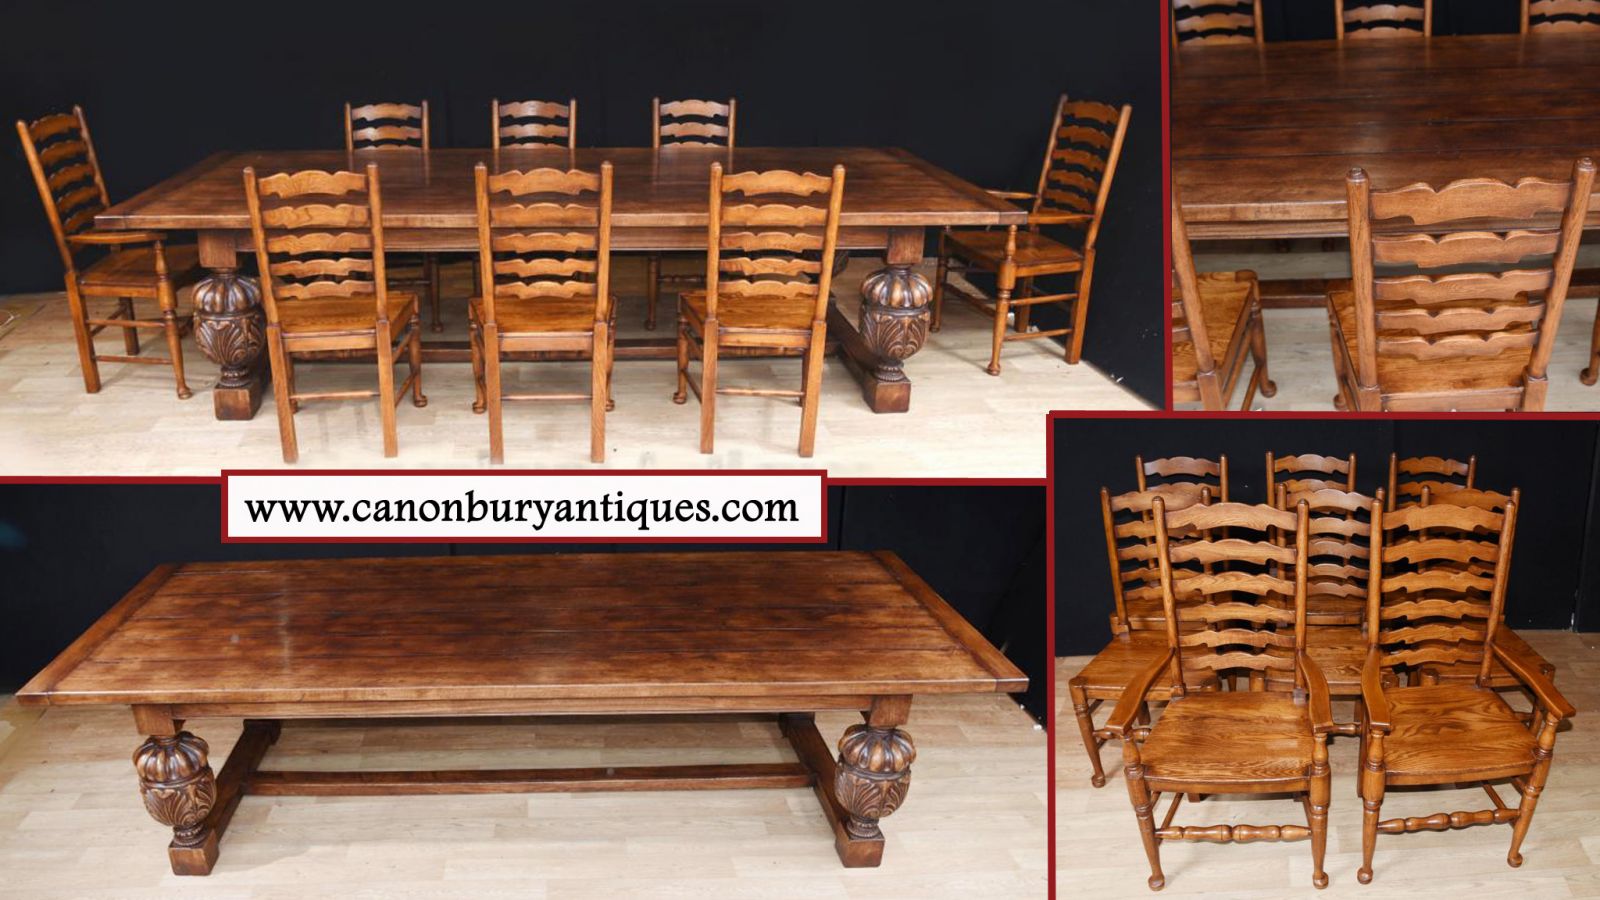 Extending Refectory tables also available with matching kitchen chairs